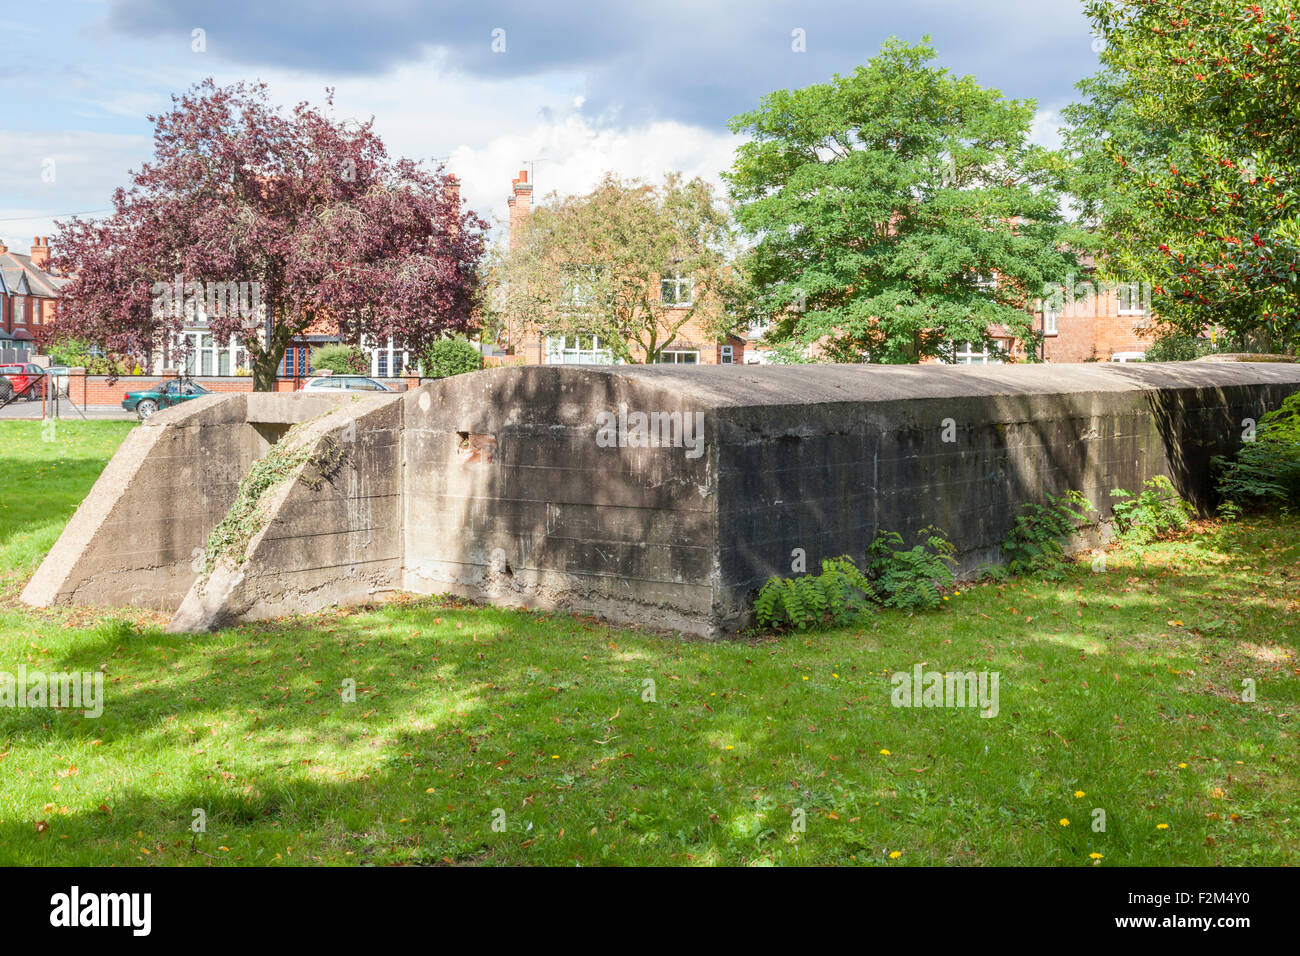 World War II air raid shelter, B34TYB, in a residential area at West Bridgford, Nottinghamshire, England, UK Stock Photo